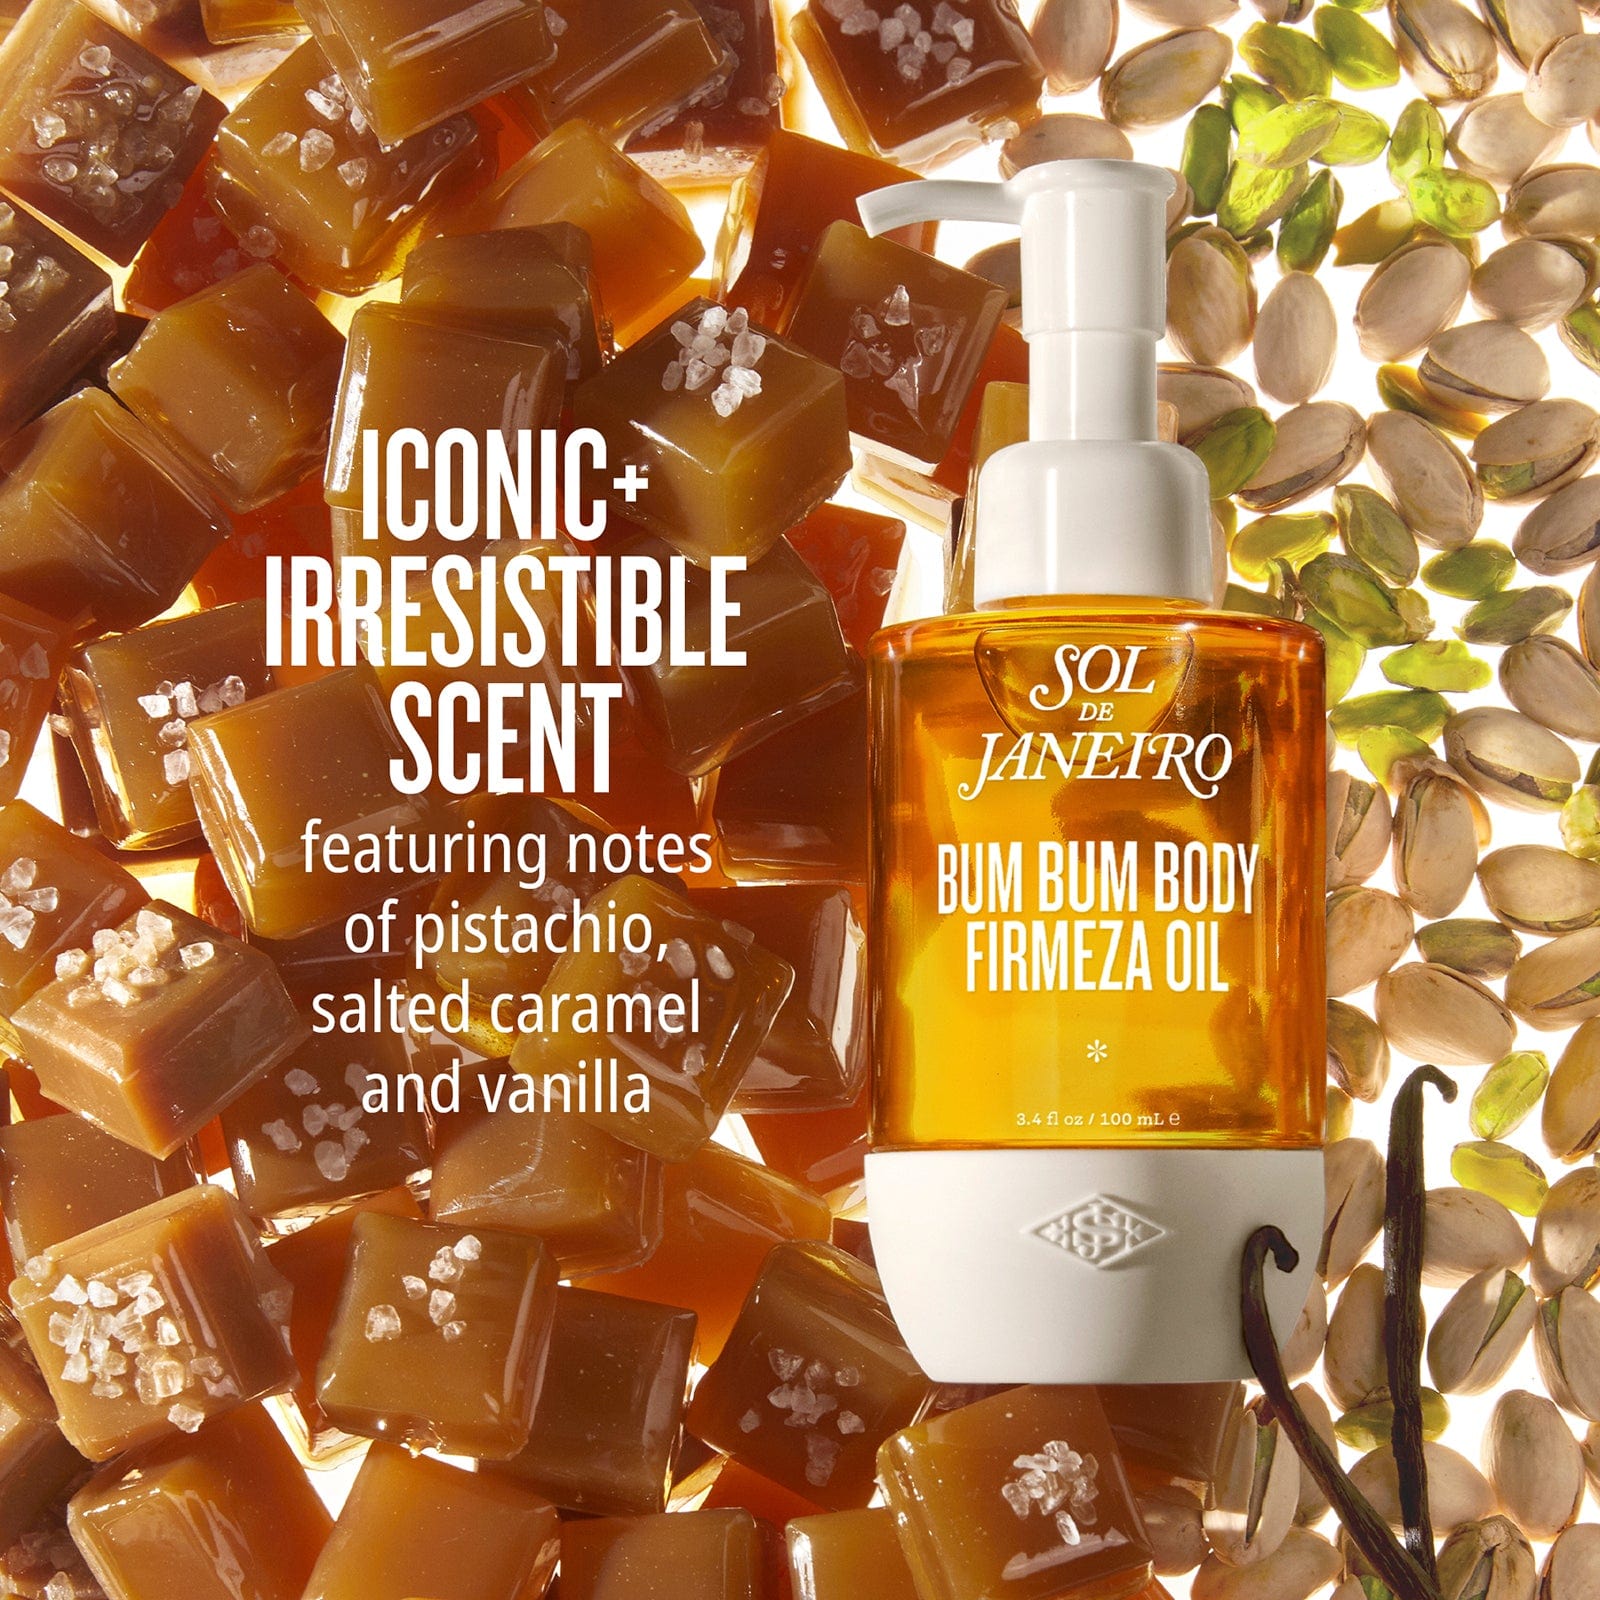 iconic + irresistible scent - featuring notes of pistachio, salted caramel and vanilla